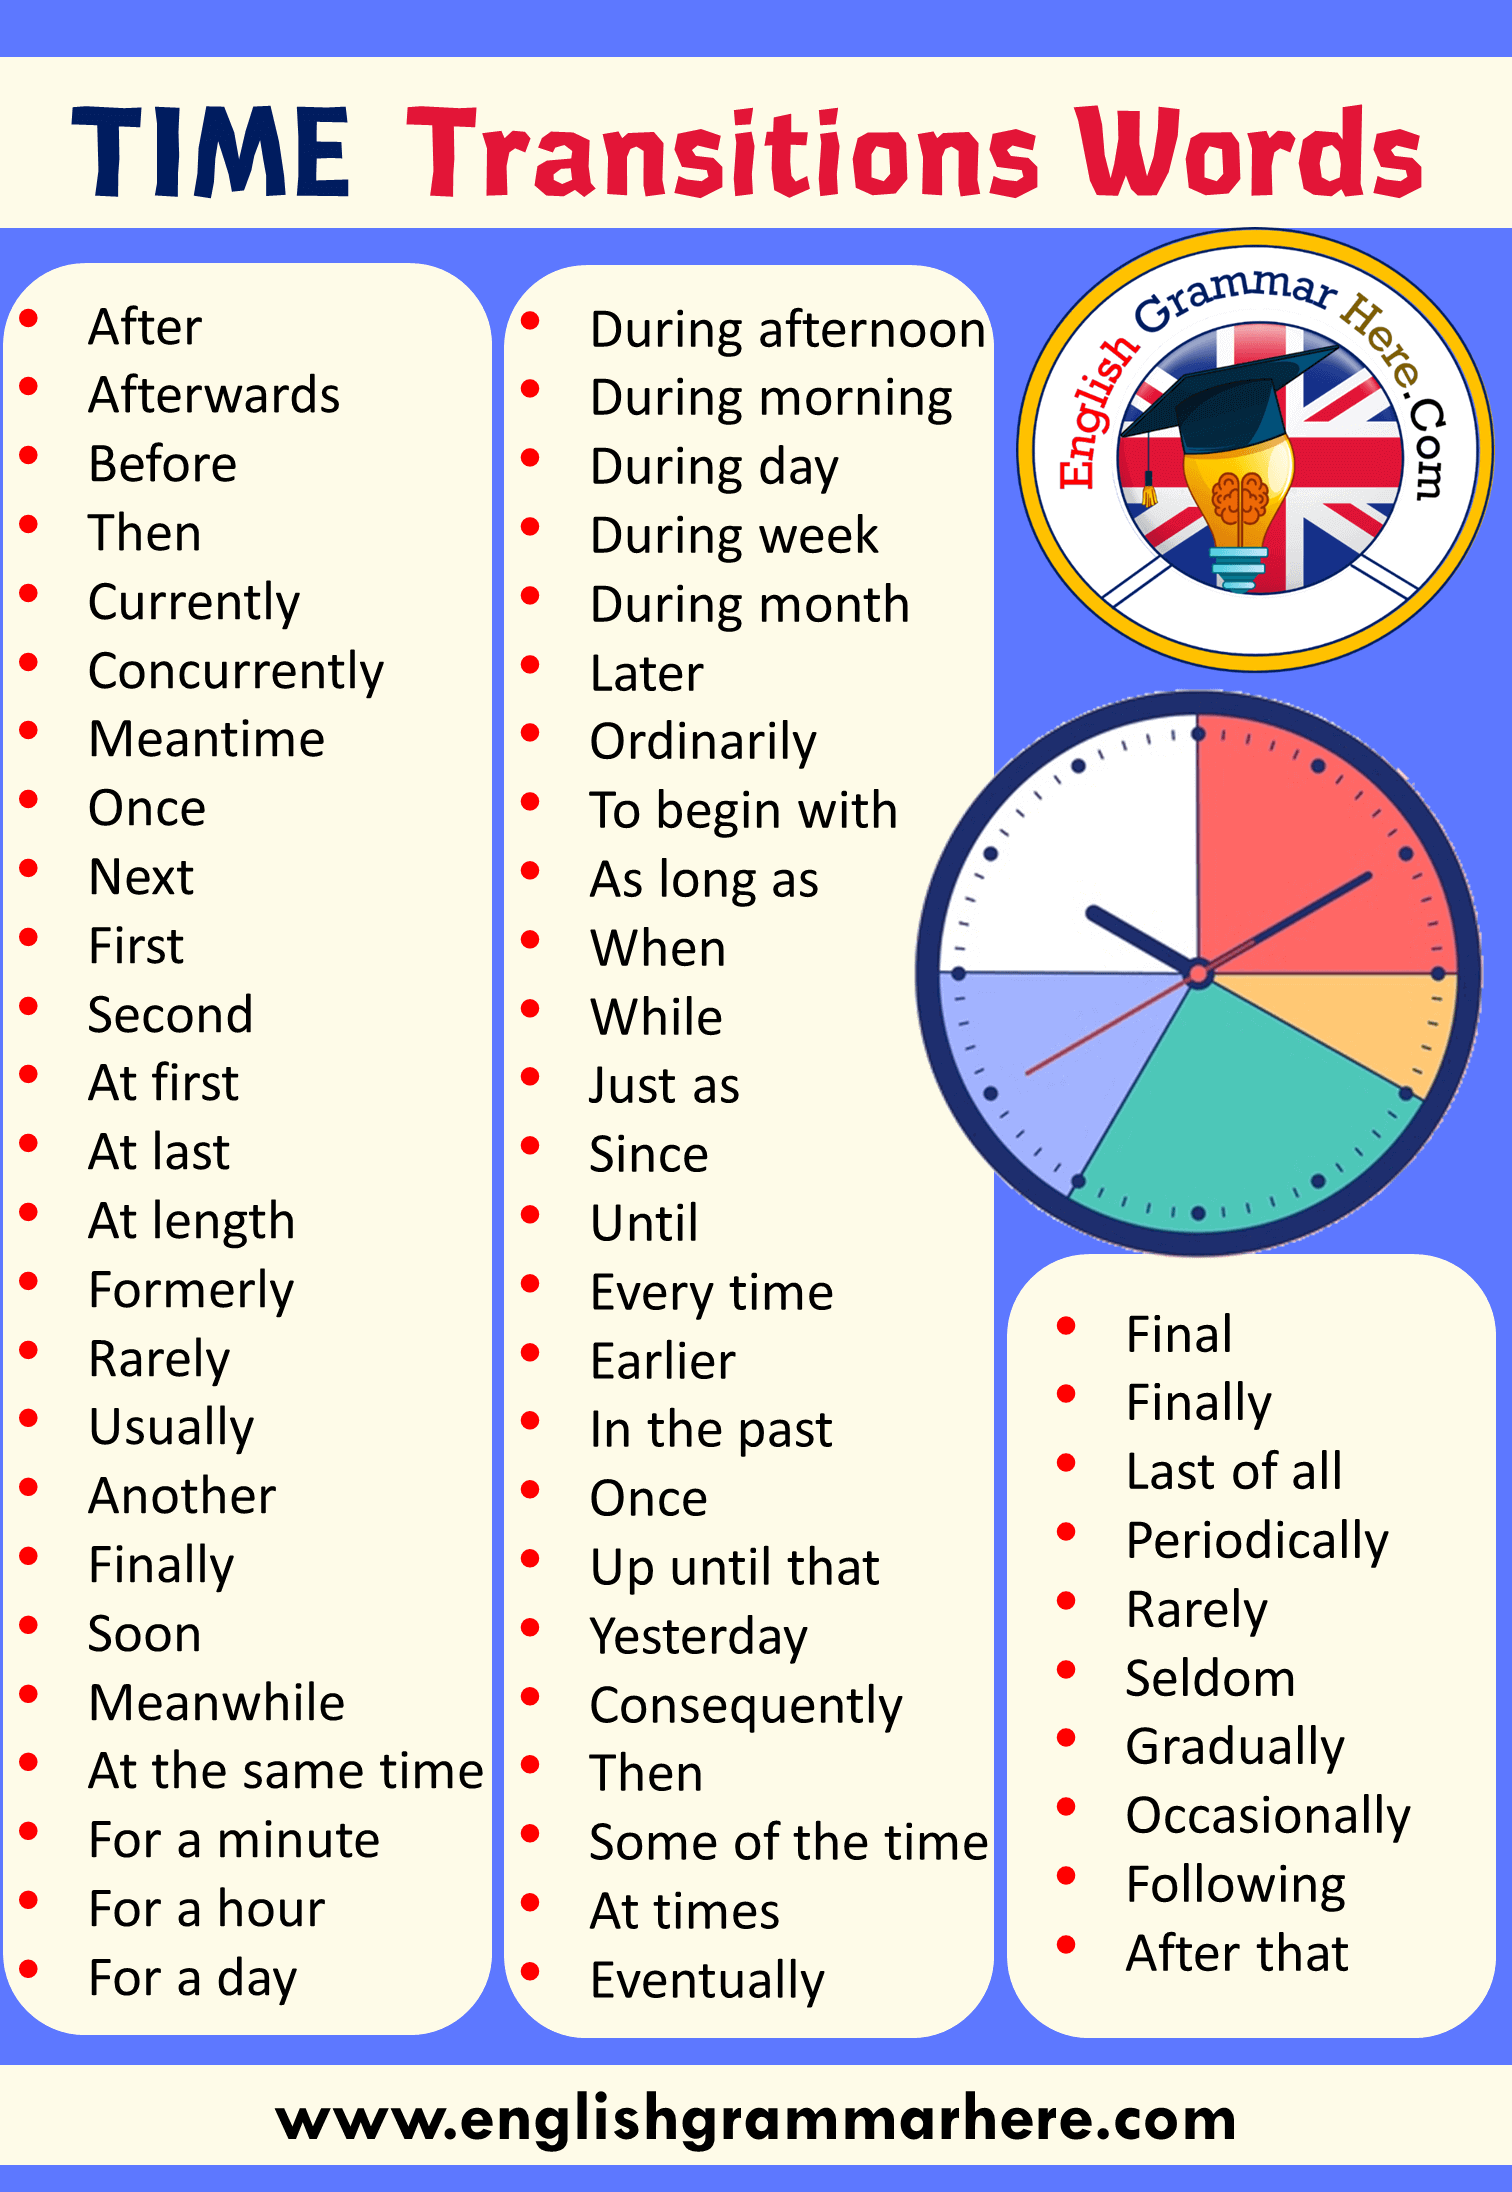 TIME Transitions Words List in English